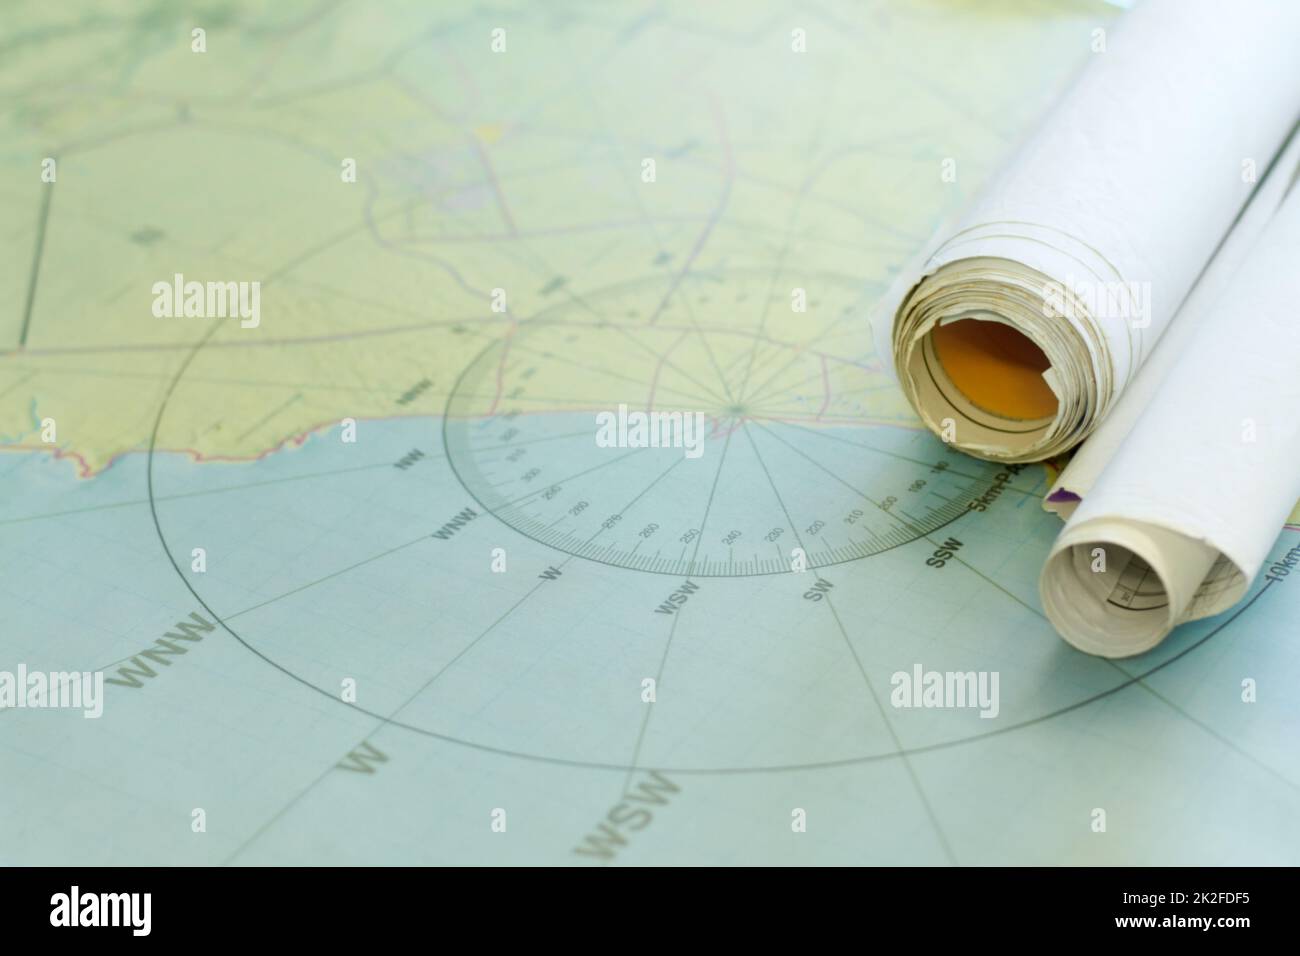 Finding coordinates. Shot of nautical maps on a table. Stock Photo